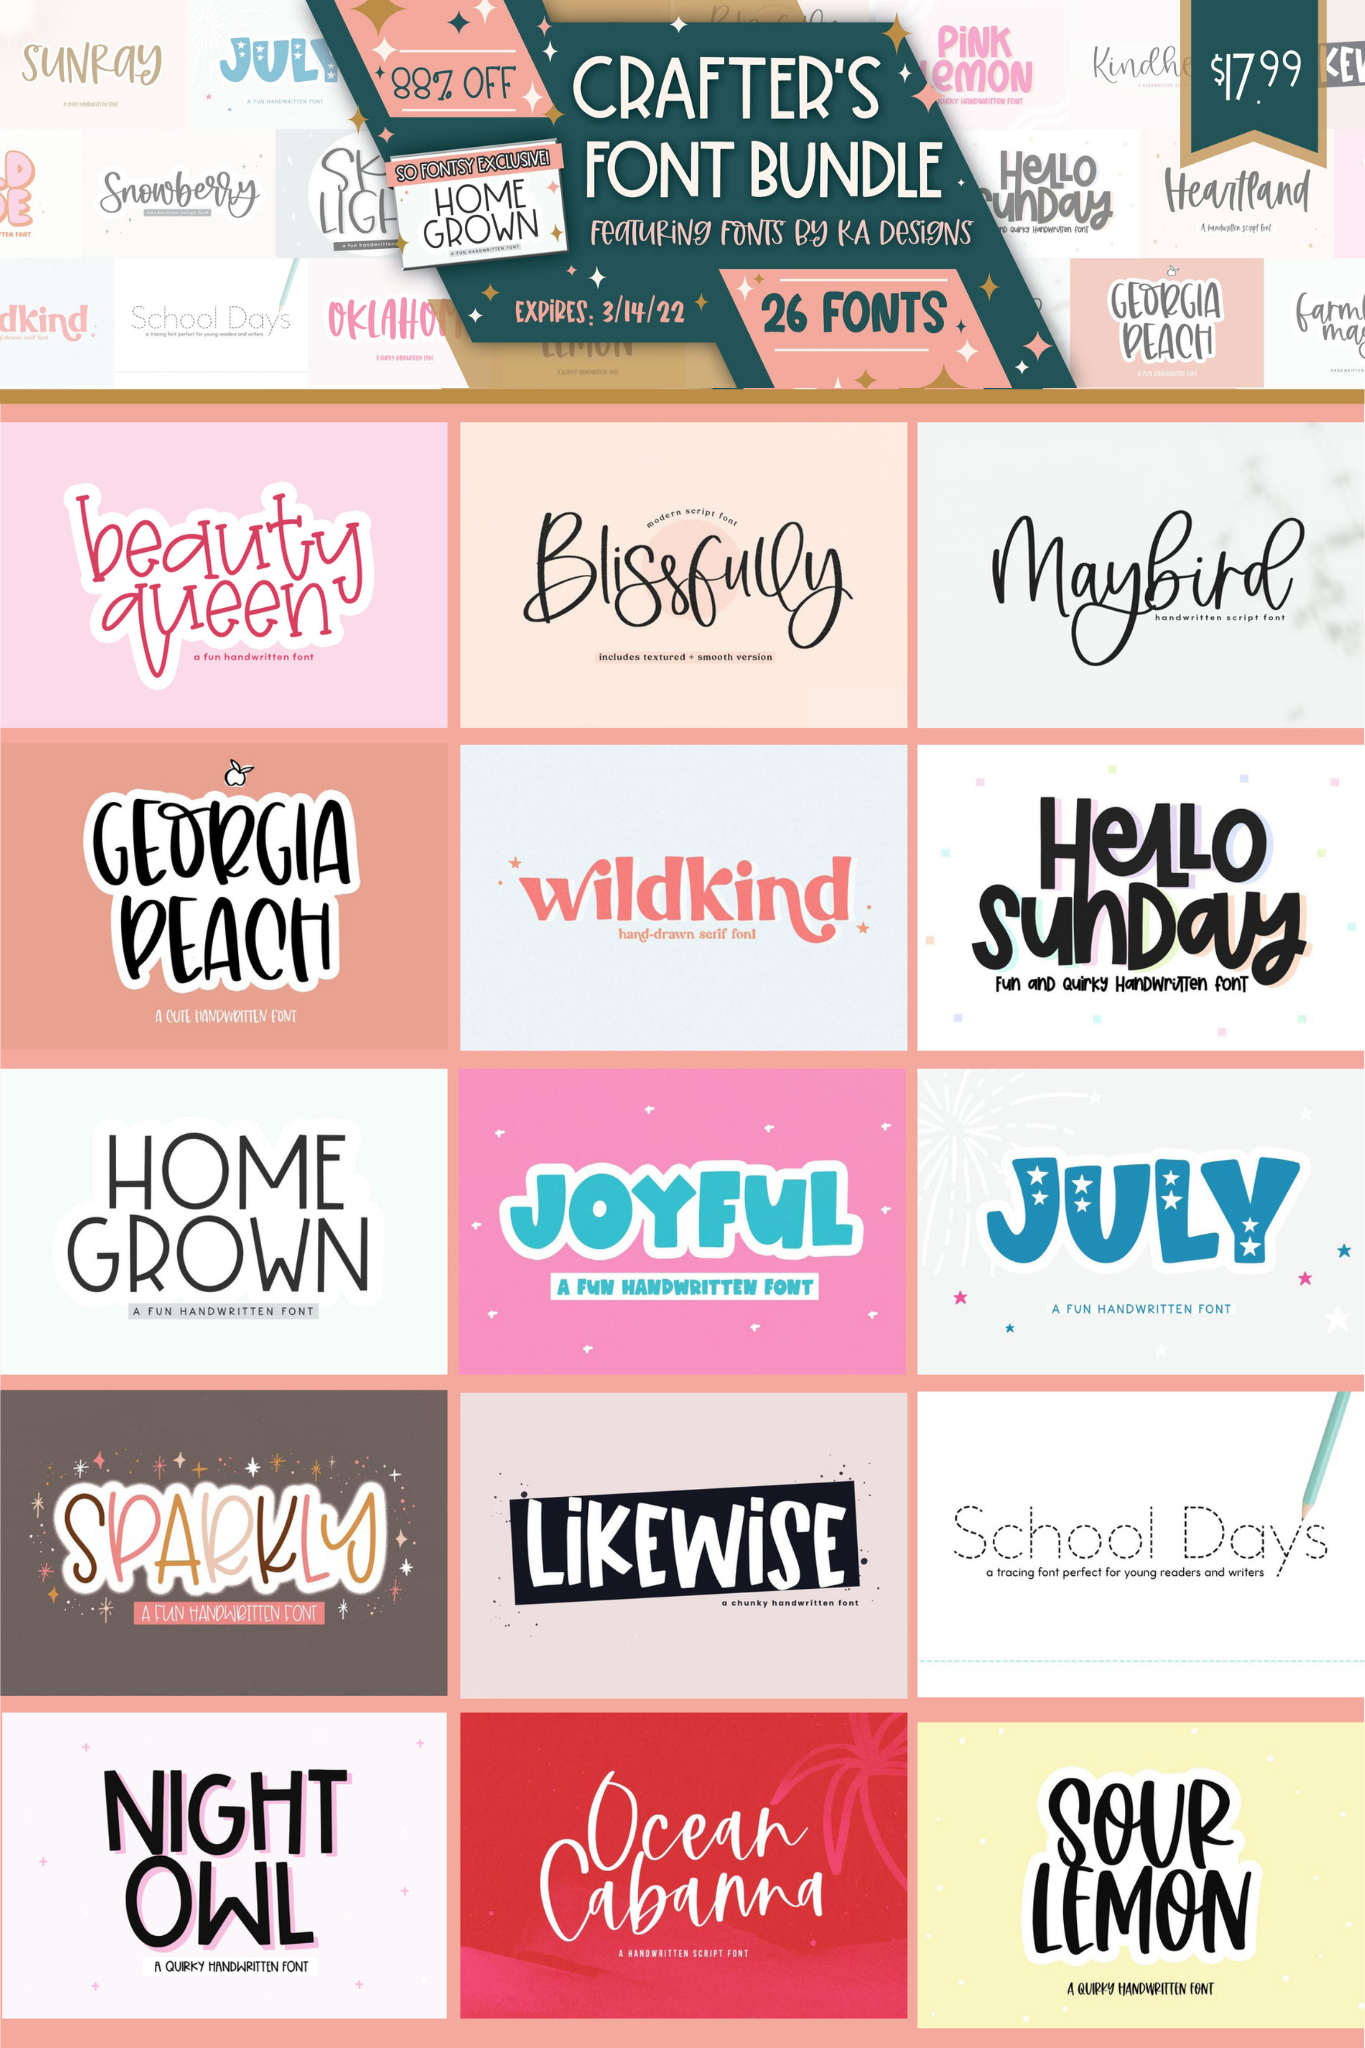 Crafters Font Bundle from So Fontsy